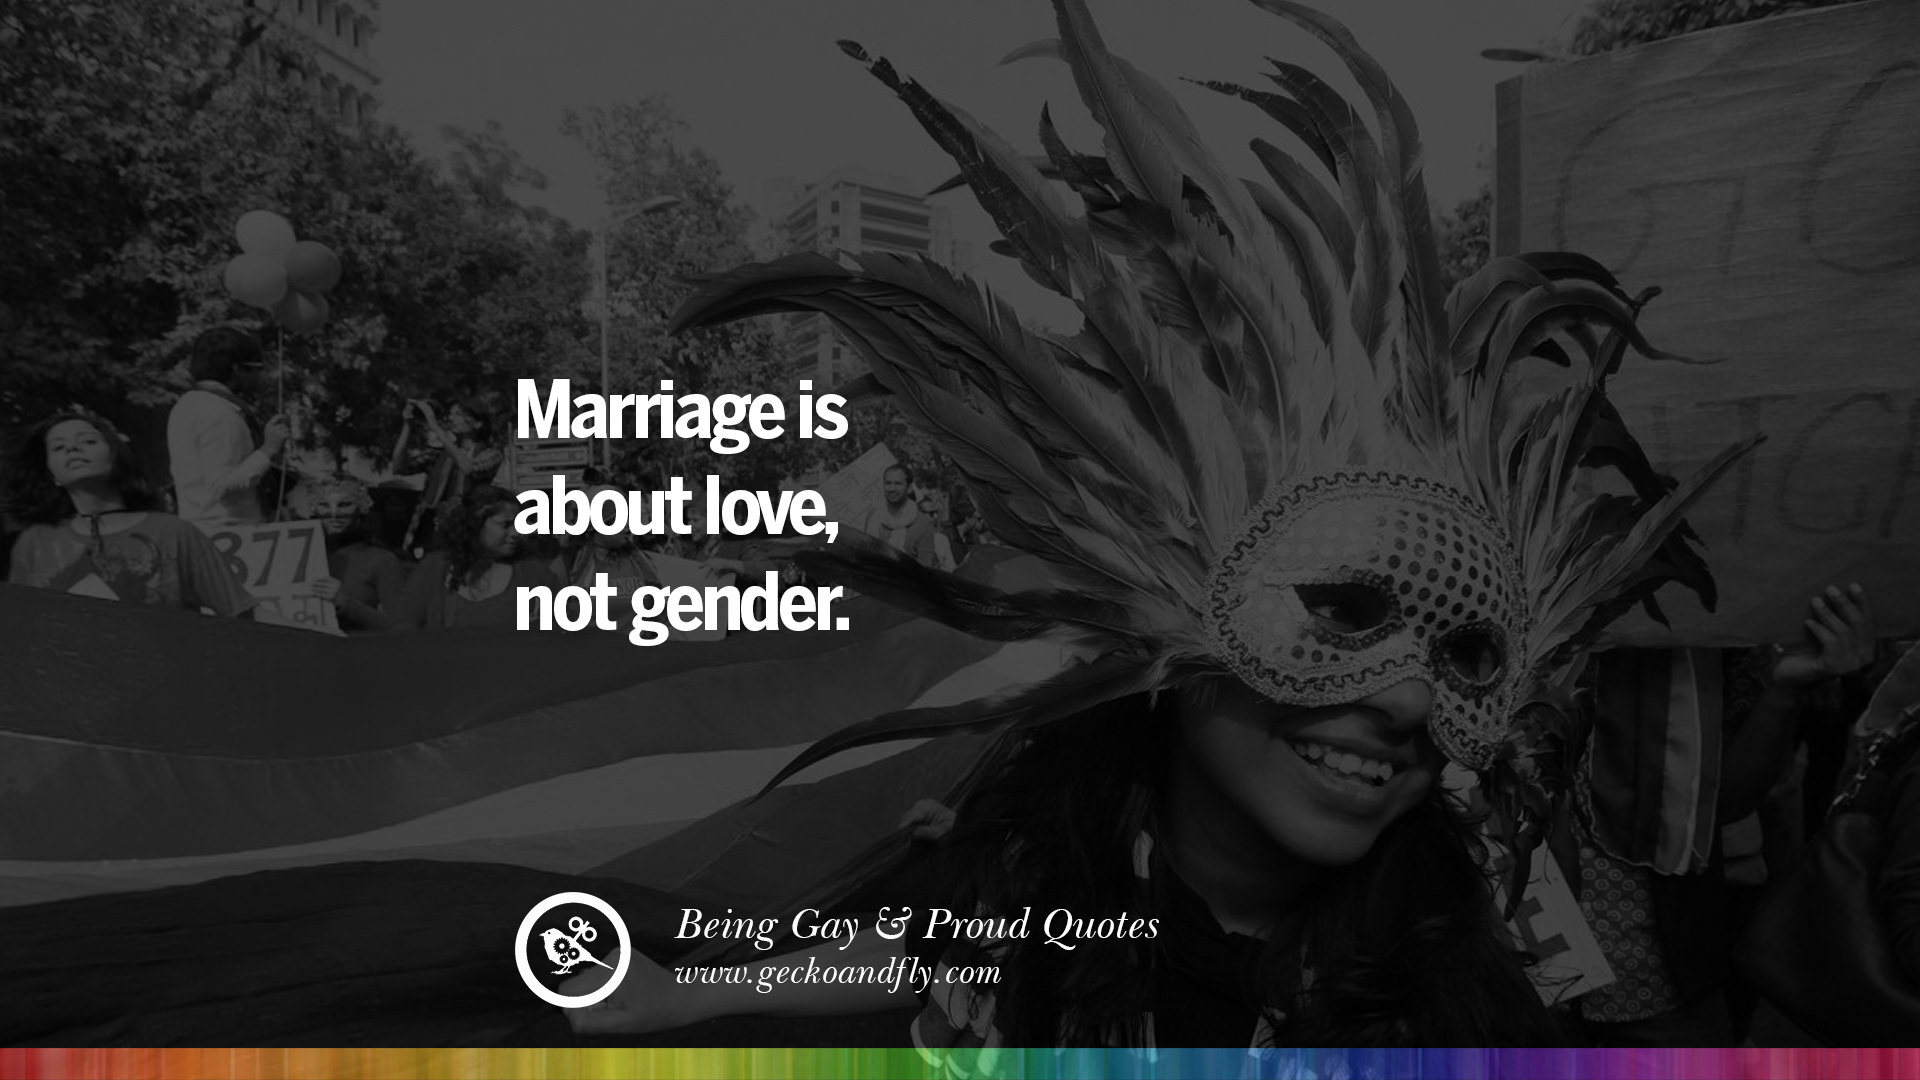 35 Quotes About Gay Pride Pro LGBT Homophobia and Marriage